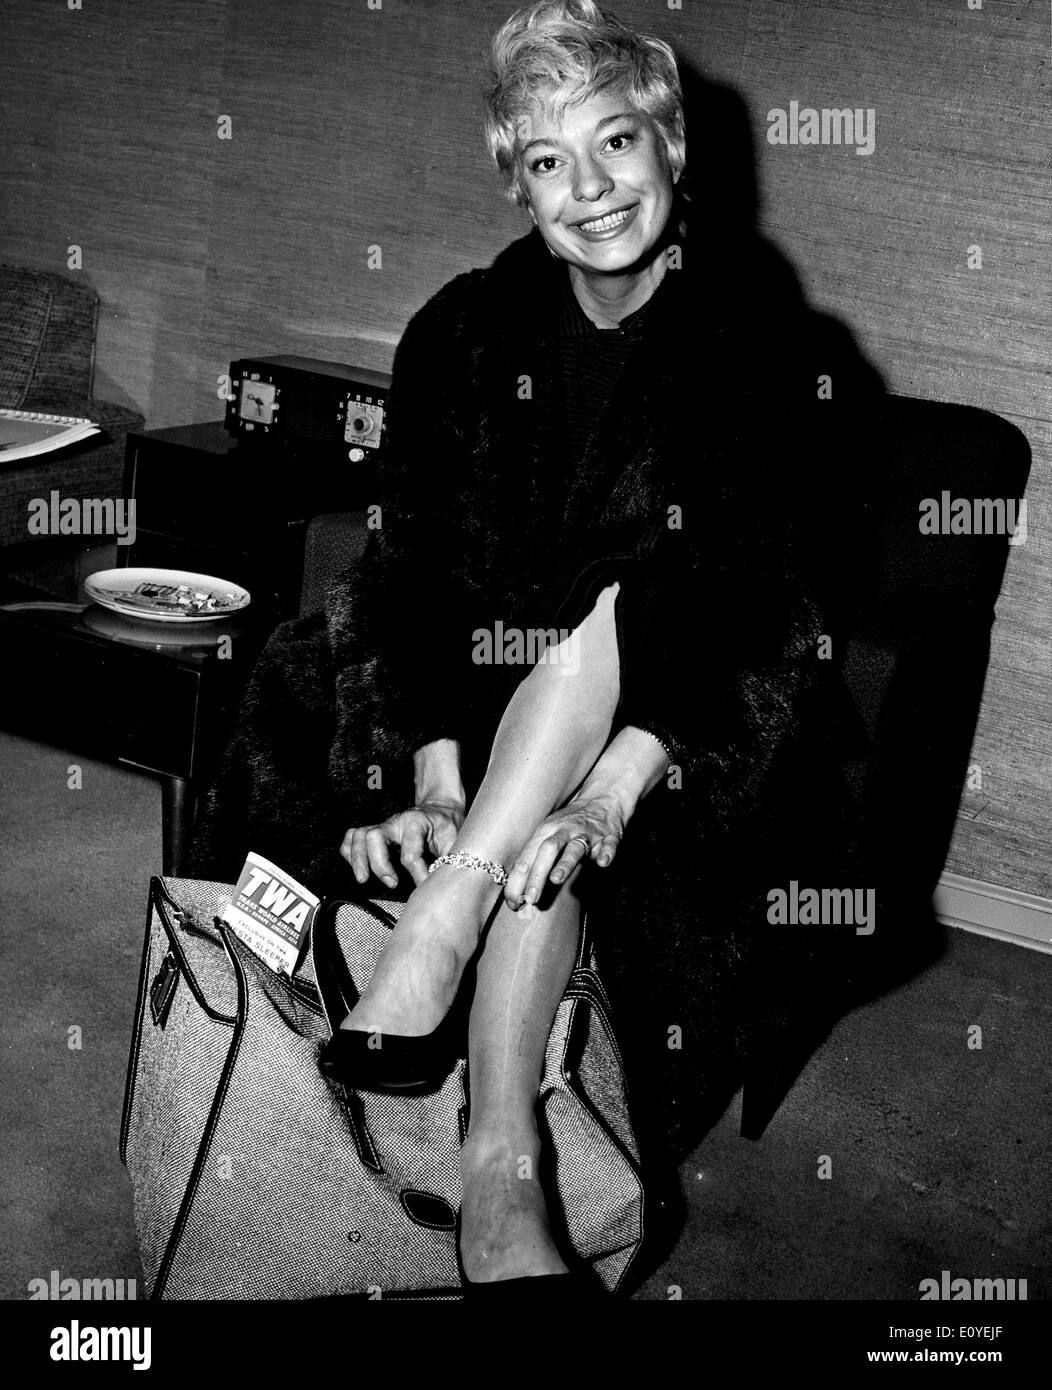 Jan. 01, 1970 - London, England, United Kingdom - File photo: circa 1970s-1980s. CAROL ELAINE CHANNING (born January 31, 1921, Seattle, Washington) is an American singer and actress. The recipient of three Tony Awards (including one for lifetime achievement), a Golden Globe and an Oscar nomination, Channing is best remembered for her role Lorelei Lee in Gentlemen Prefer Blondes, and as Dolly Gallagher Levi in Hello, Dolly! Stock Photo